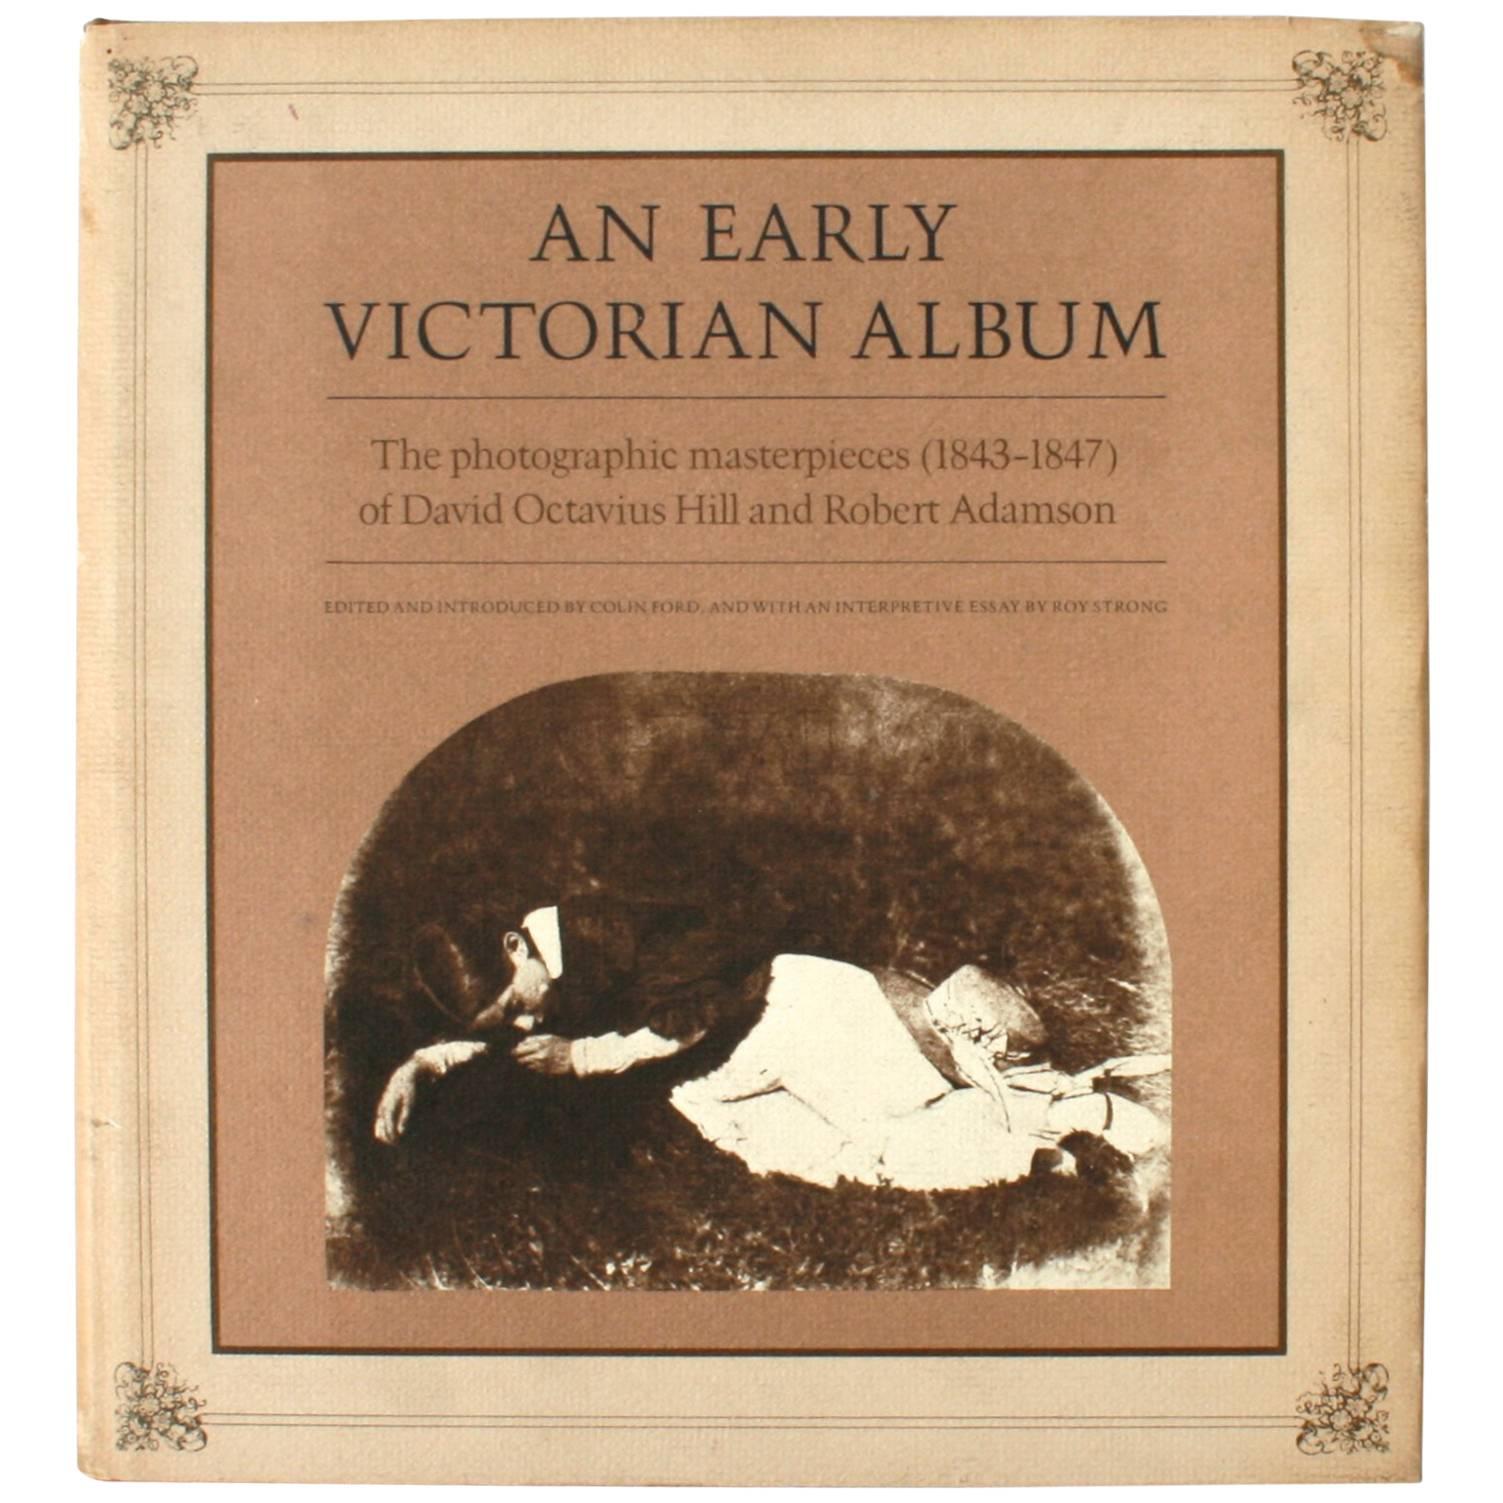 An Early Victorian Album: The Photographic Masterpieces, 1st Ed